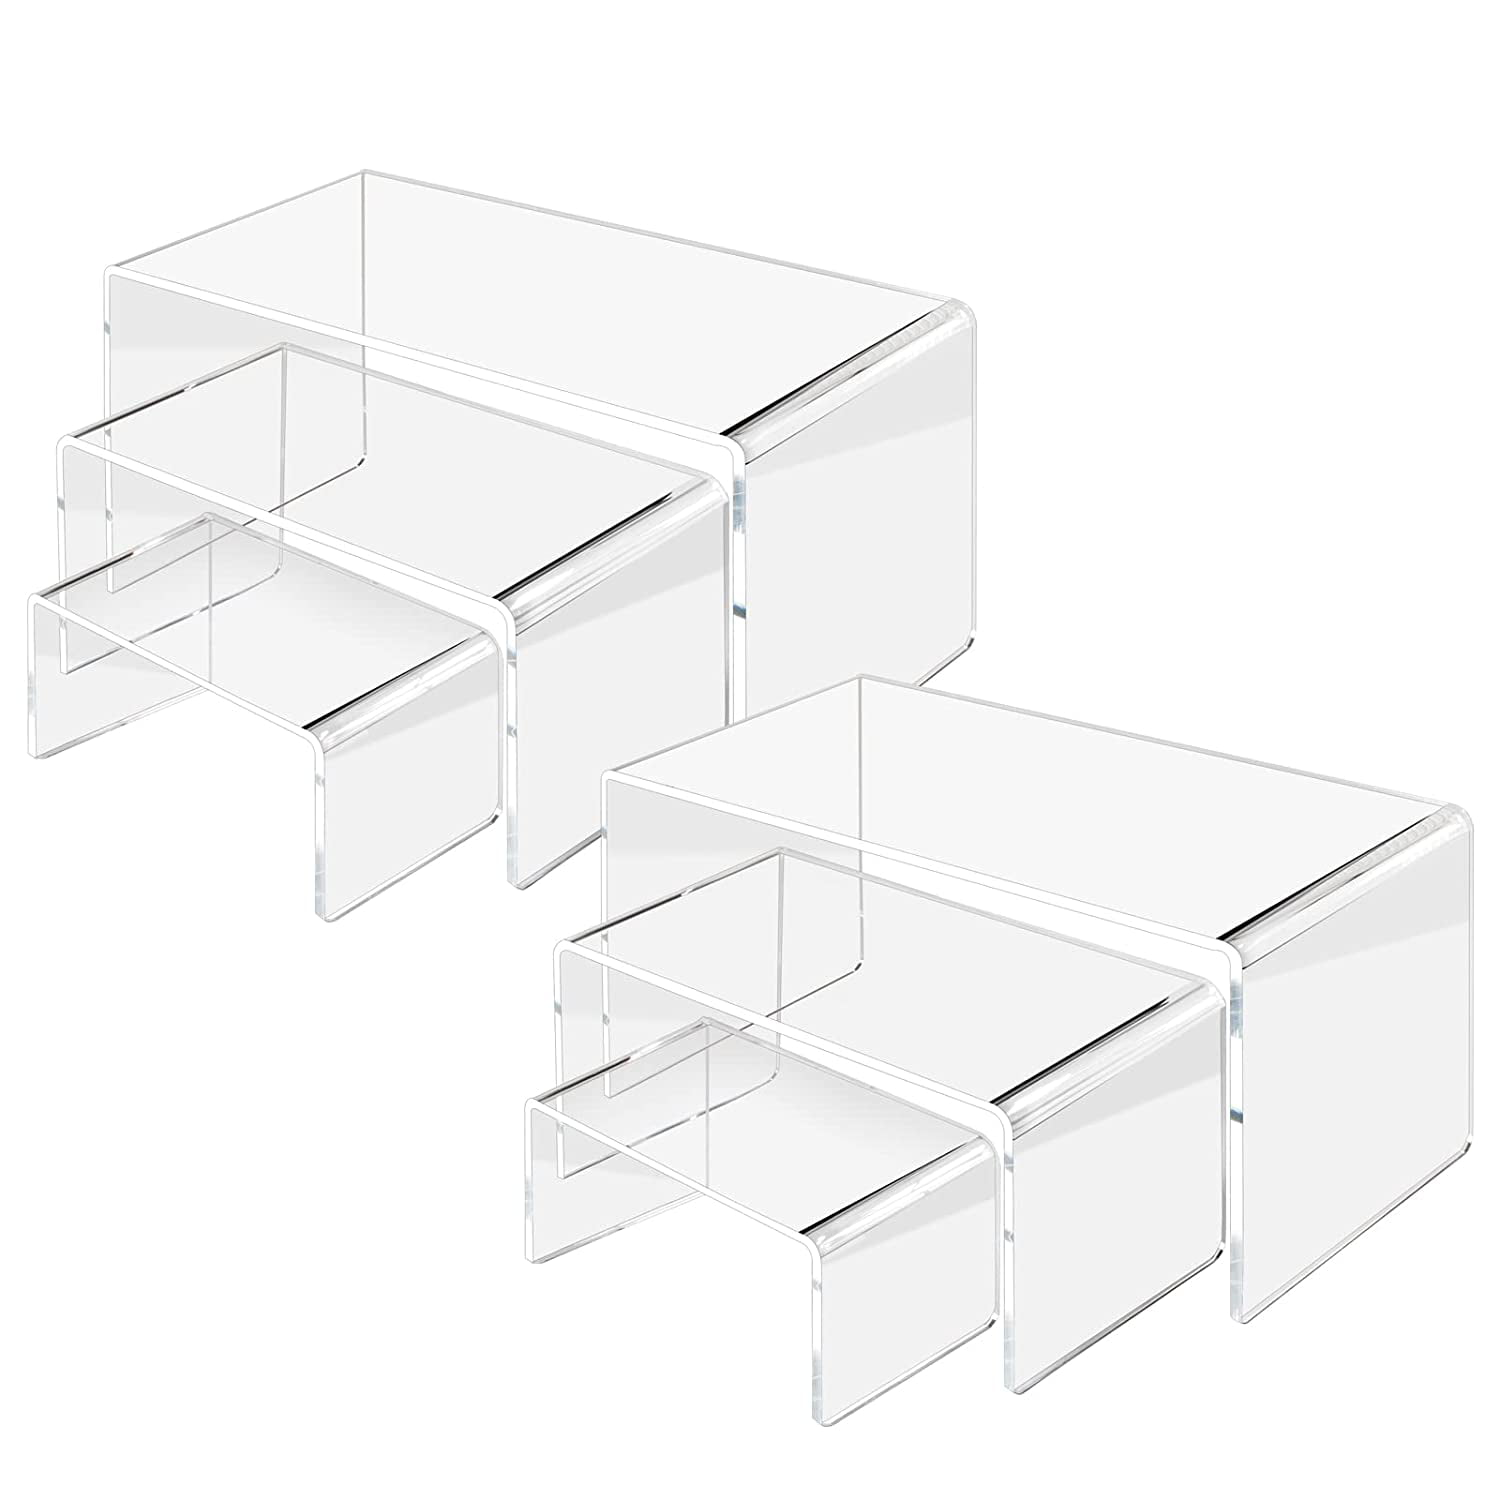 Hi-glossy Clear Acrylic jewelry display riser stand set of 5-2" to 4" W 